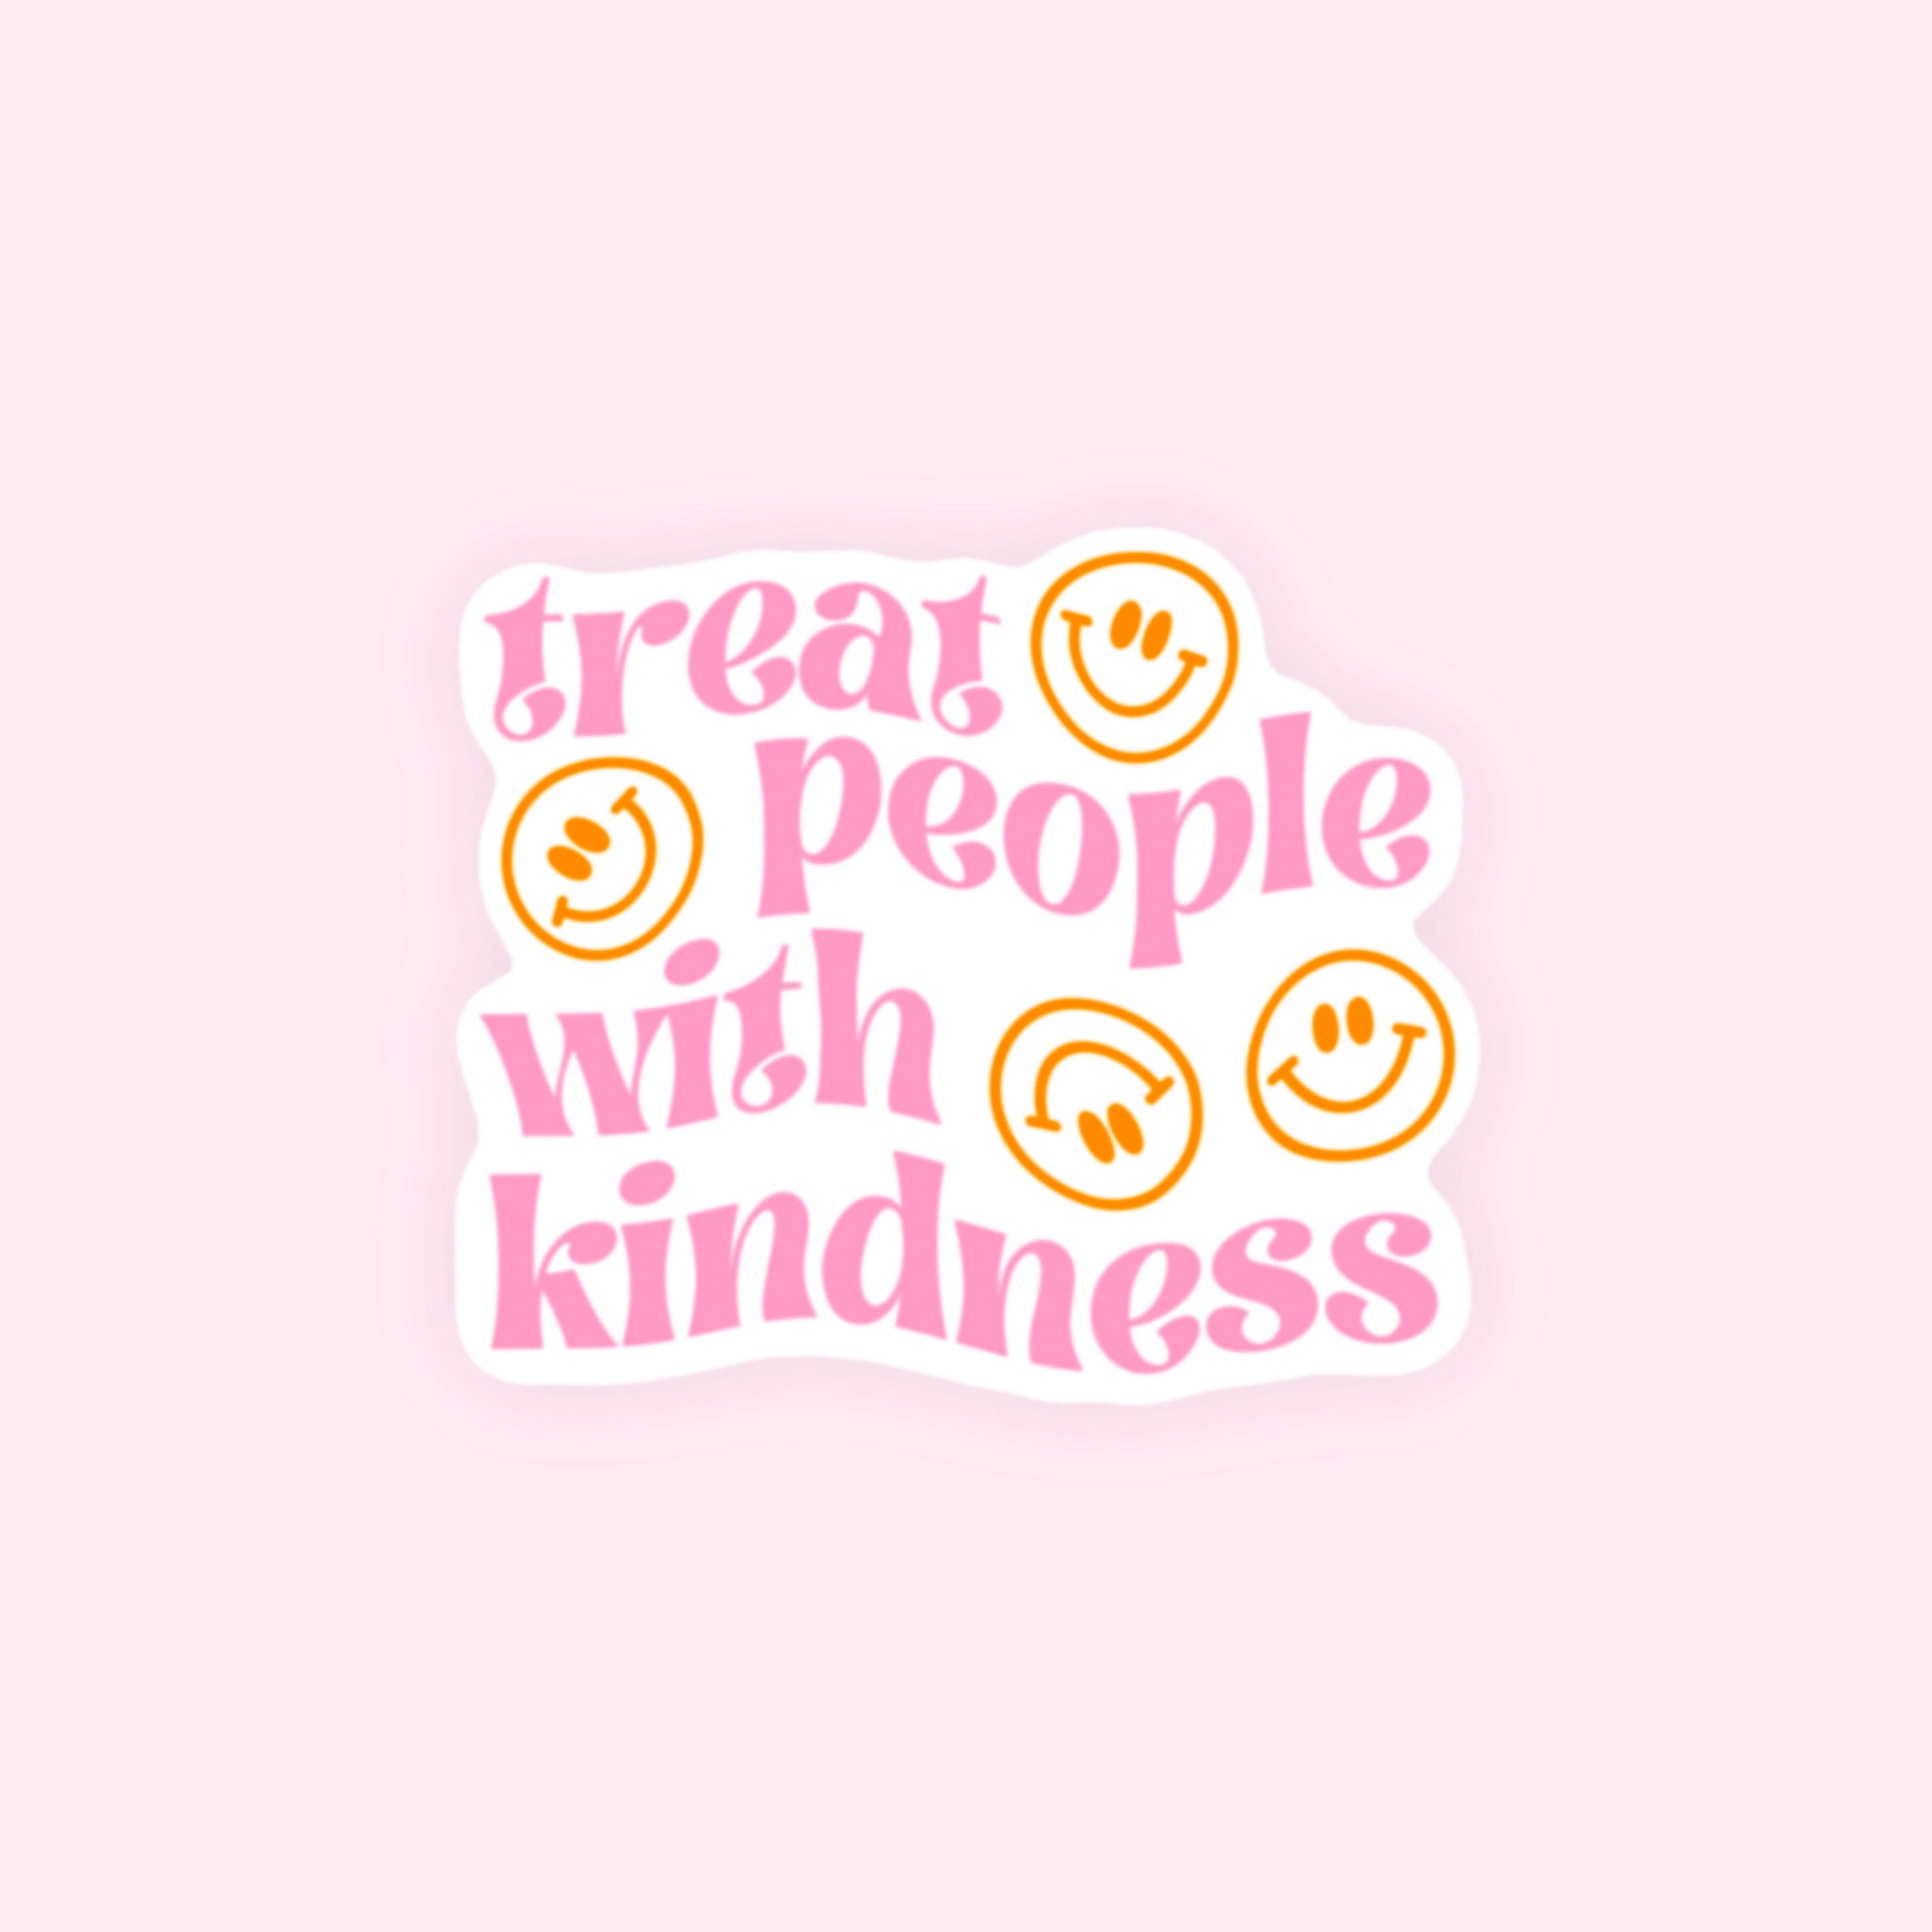 Treat People with Kindness Sticker